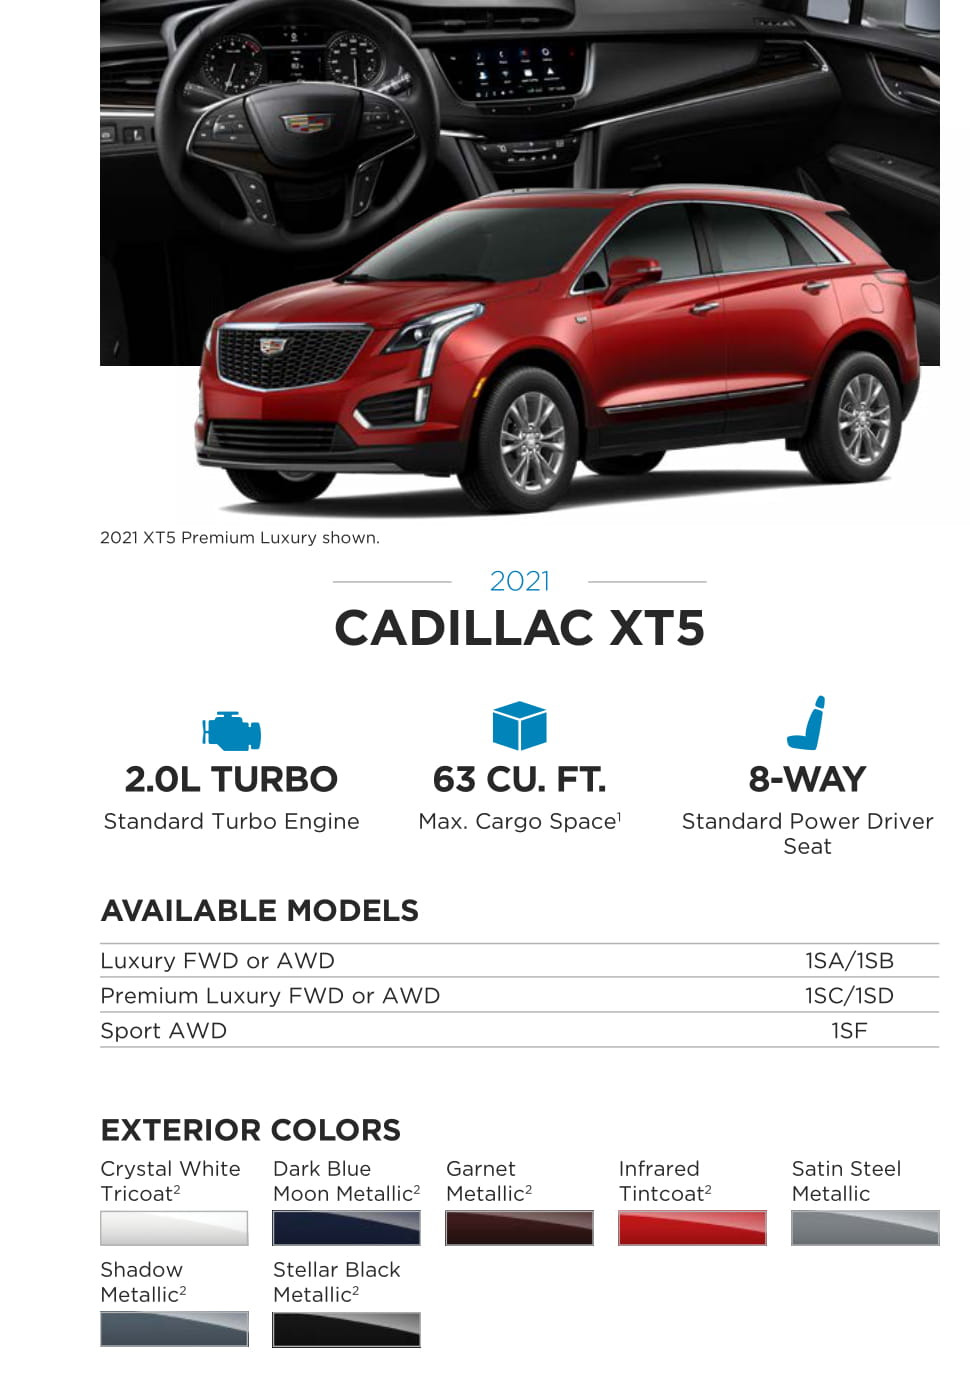 Exterior Colors used on this model Cadillac in 2021